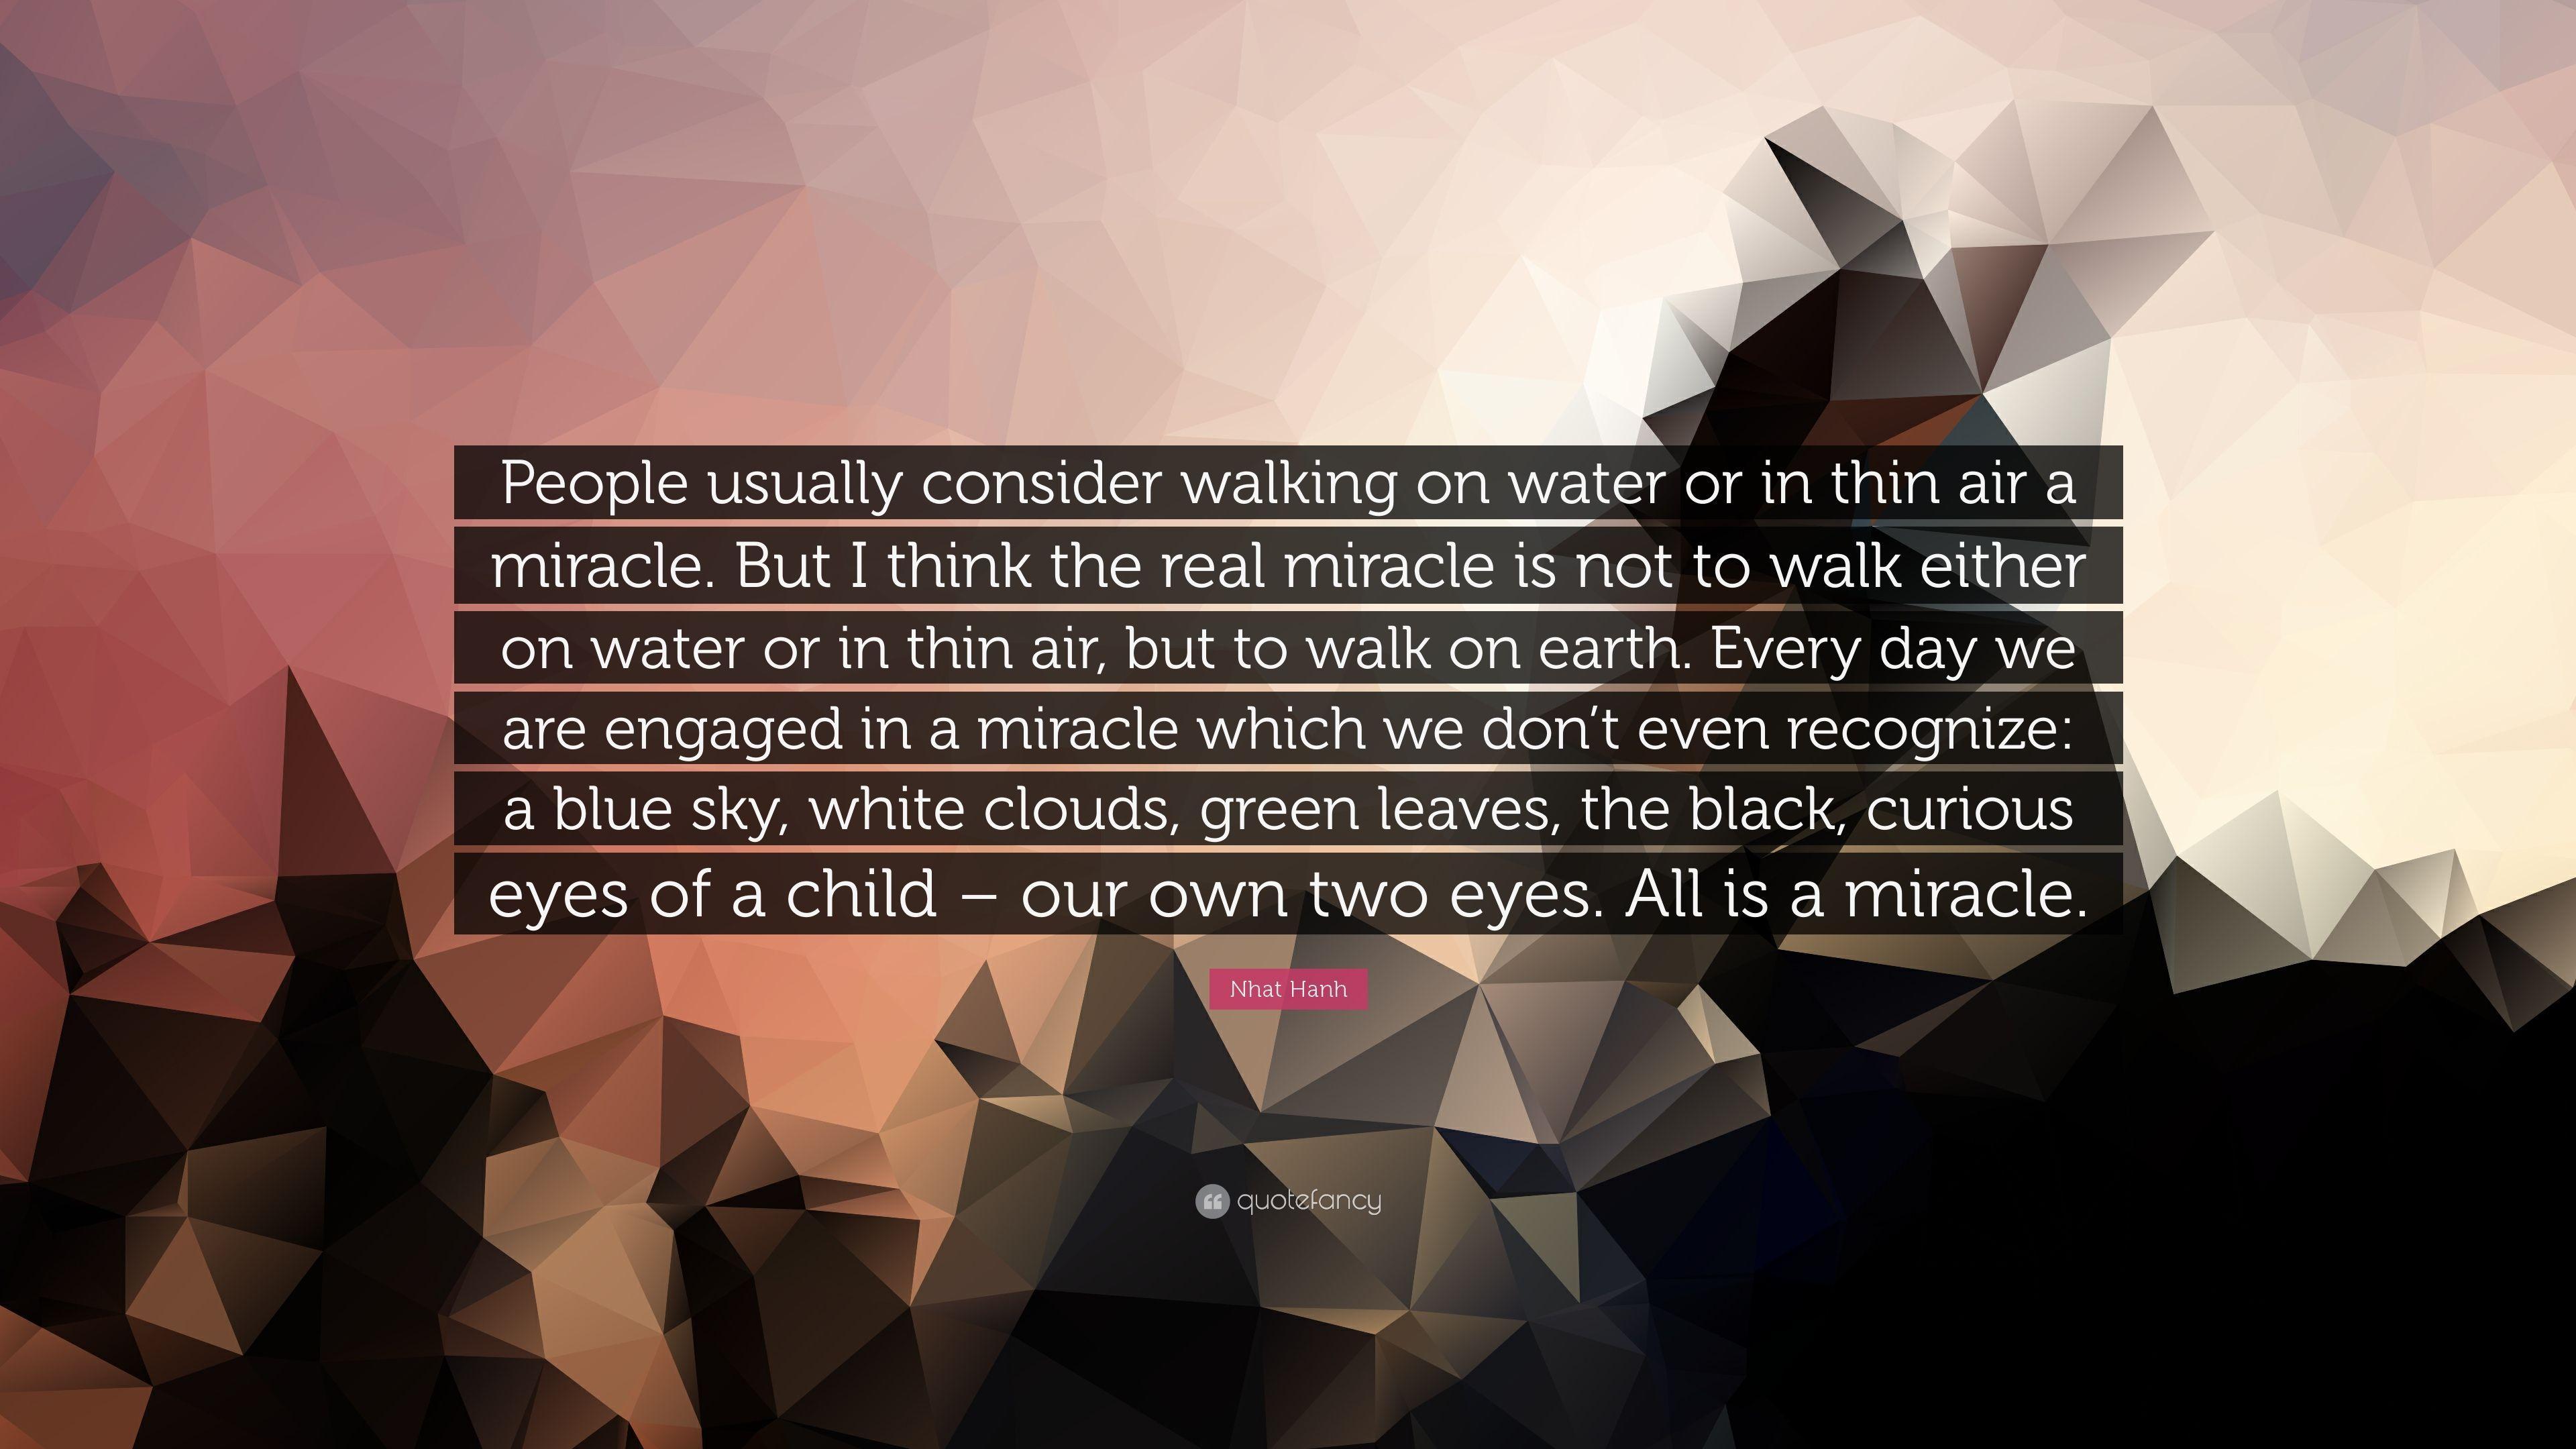 Nhat Hanh Quote: “People usually consider walking on water or